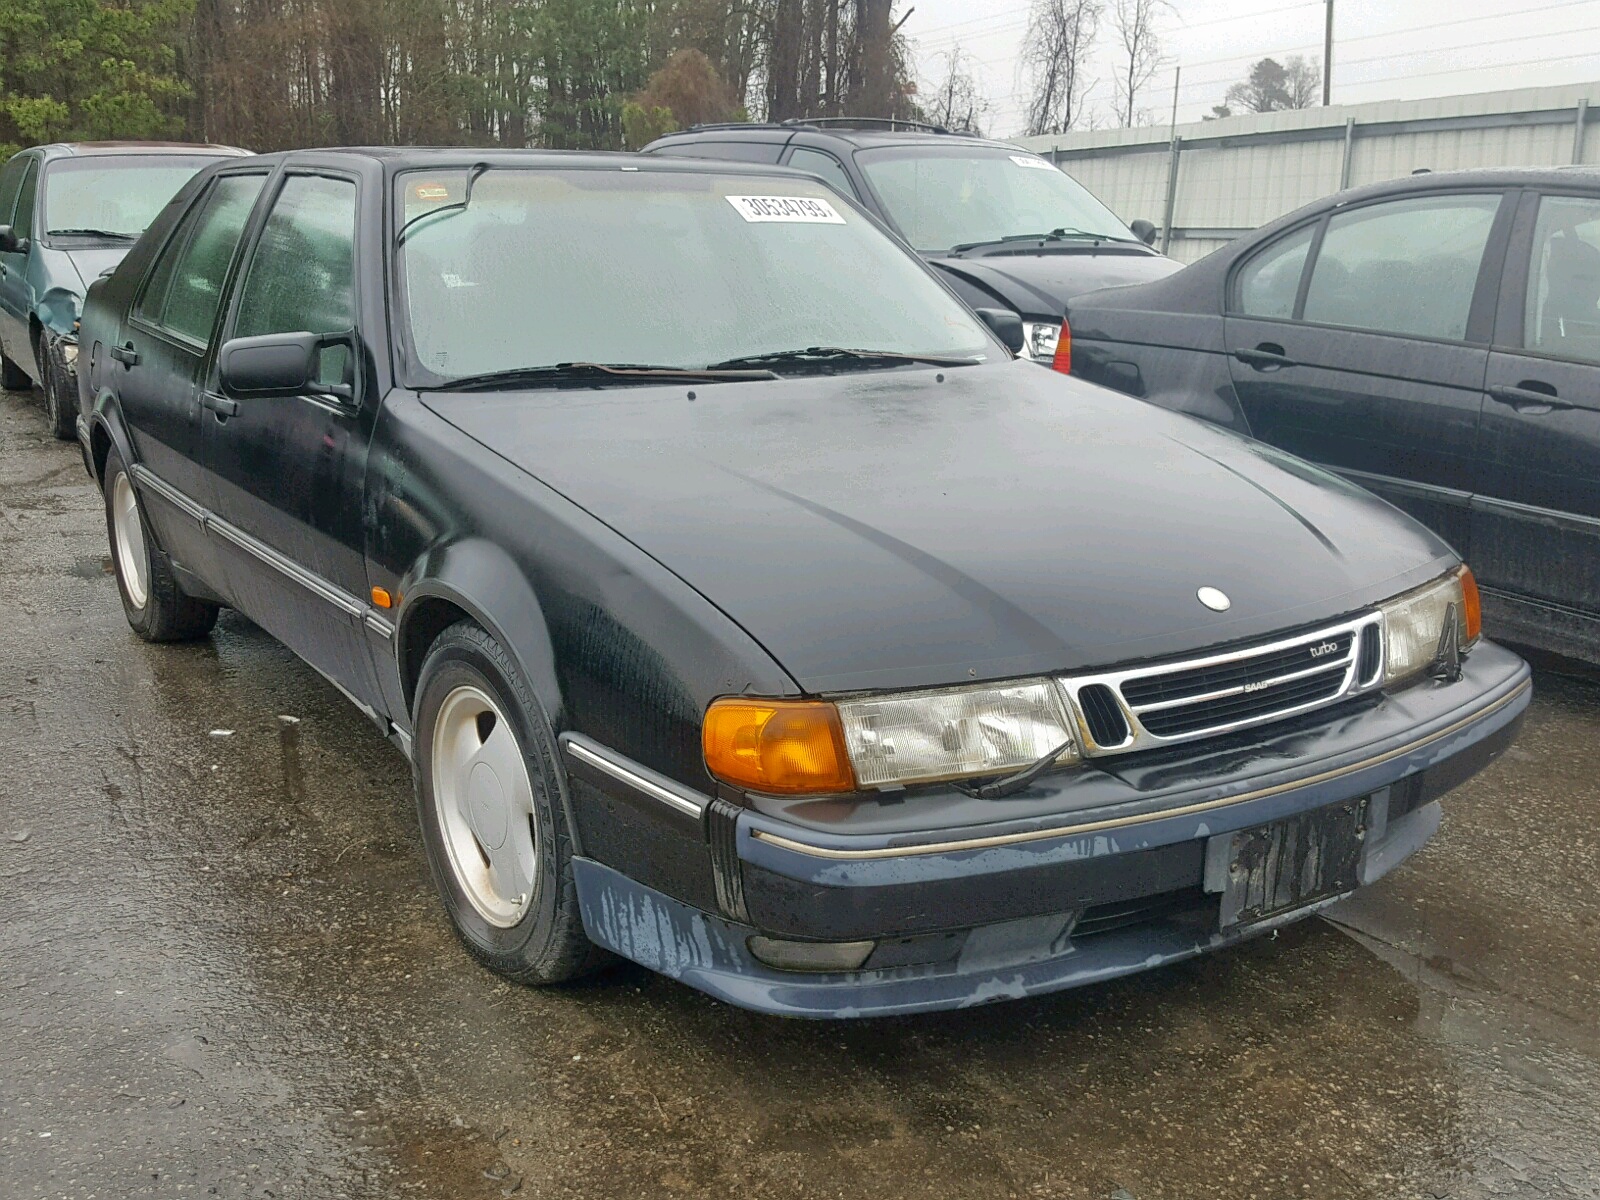 Find Salvage Saab Cars At Insurance Auctions